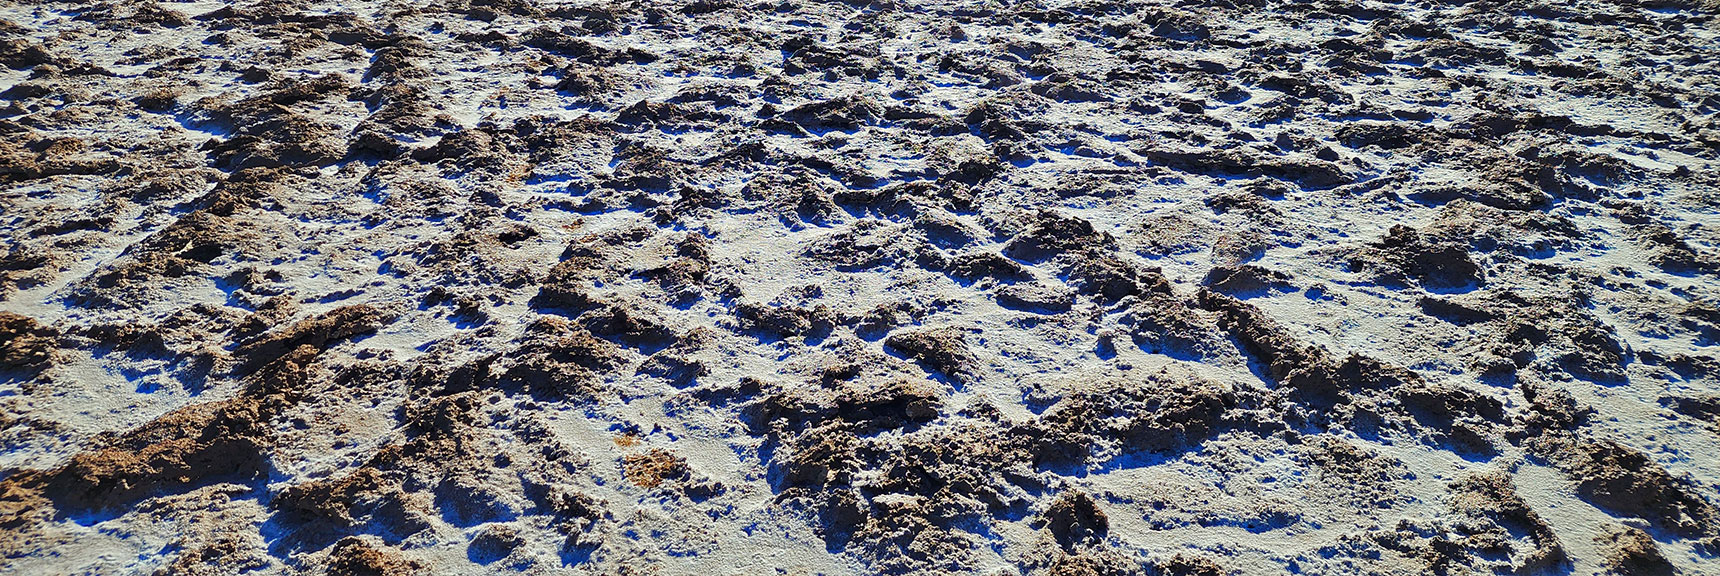 Always a Combination of Salts and Soil. Many Variations and Patterns Across the Desert Floor | Death Valley Crossing | Death Valley National Park, California | David Smith | LasVegasAreaTrails.com